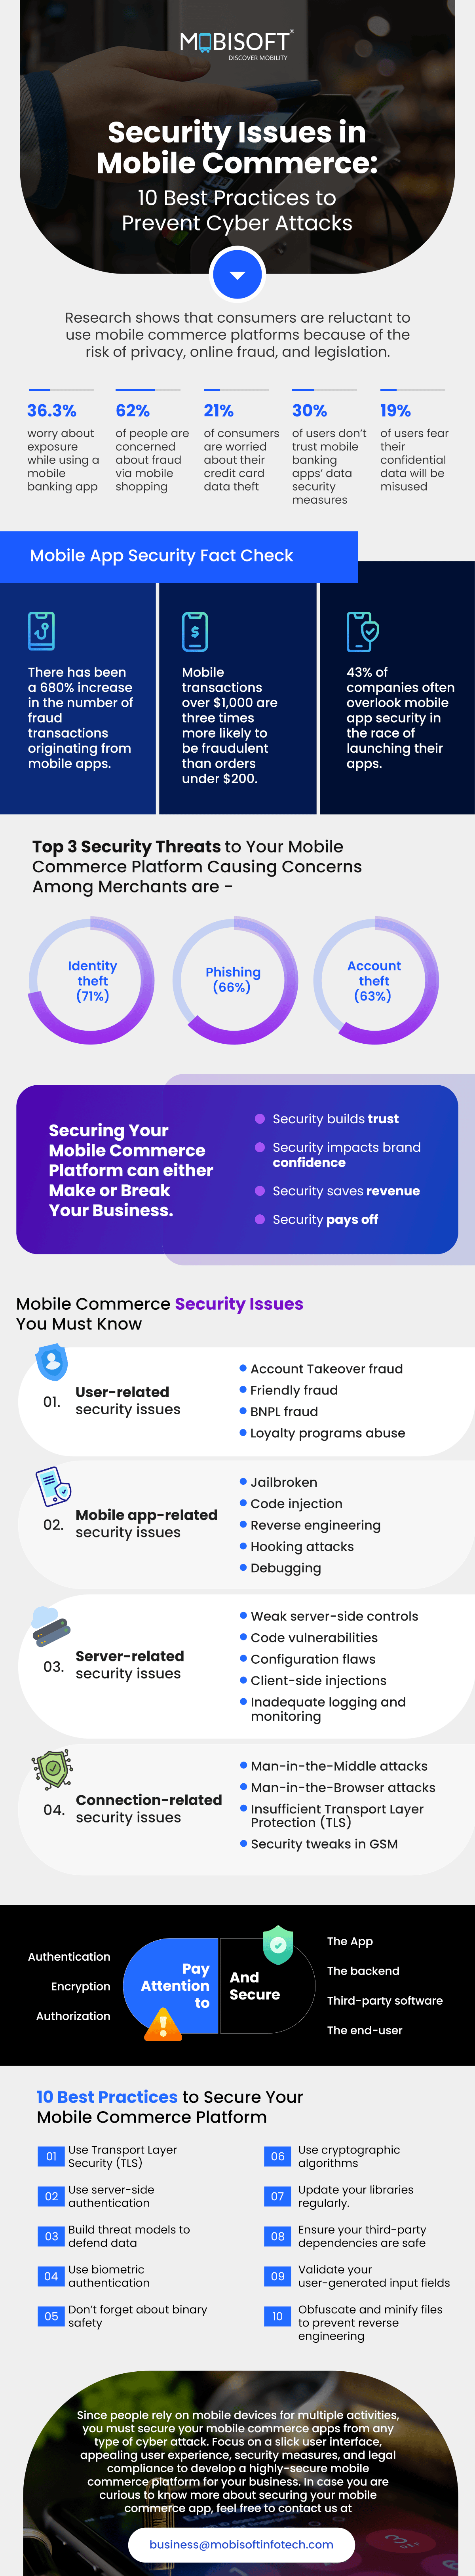 Security Issues in Mobile Commerce